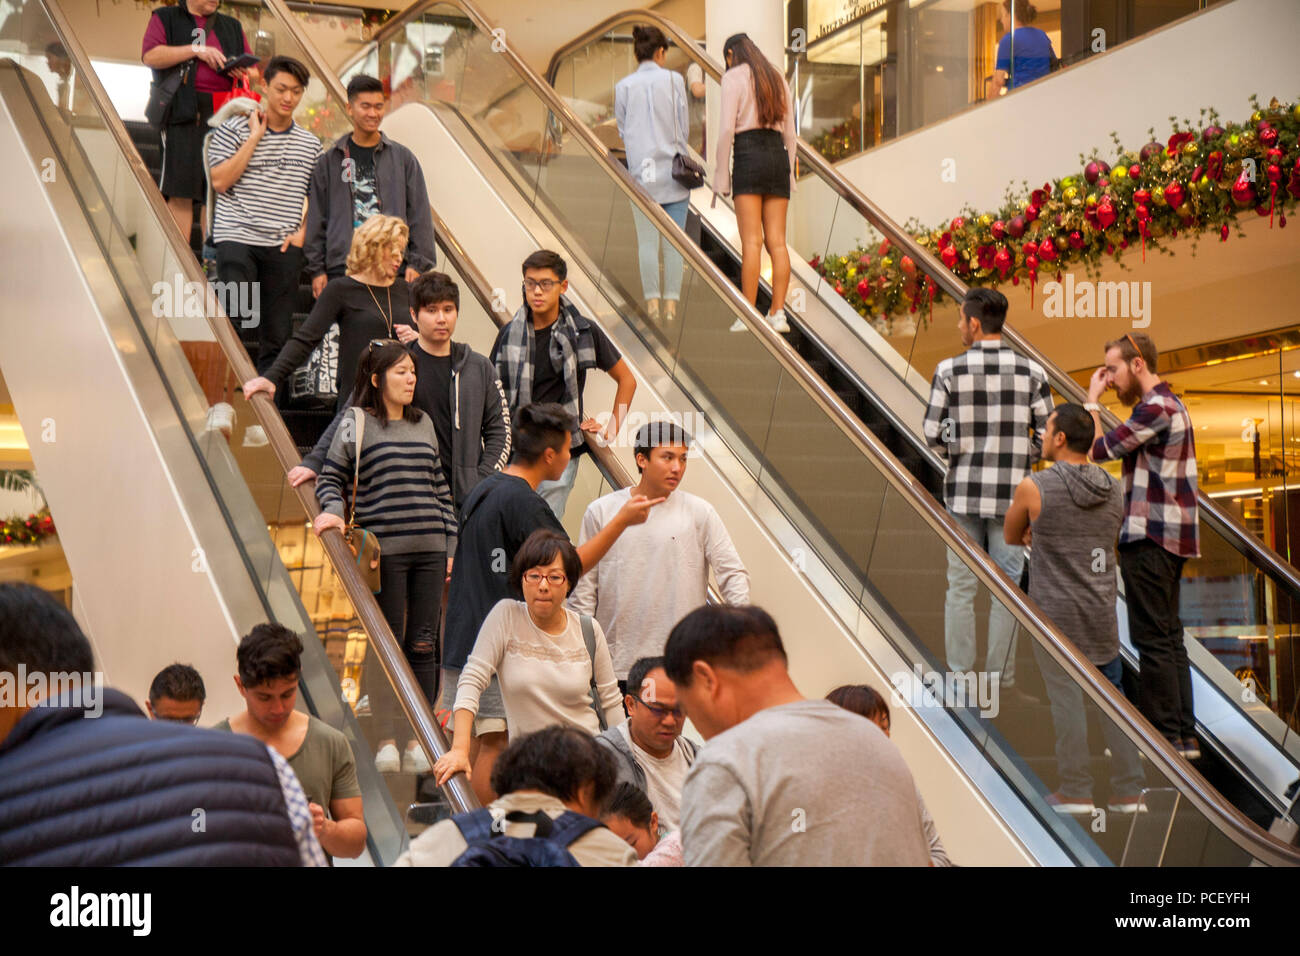 South coast plaza mall costa mesa hi-res stock photography and images -  Alamy